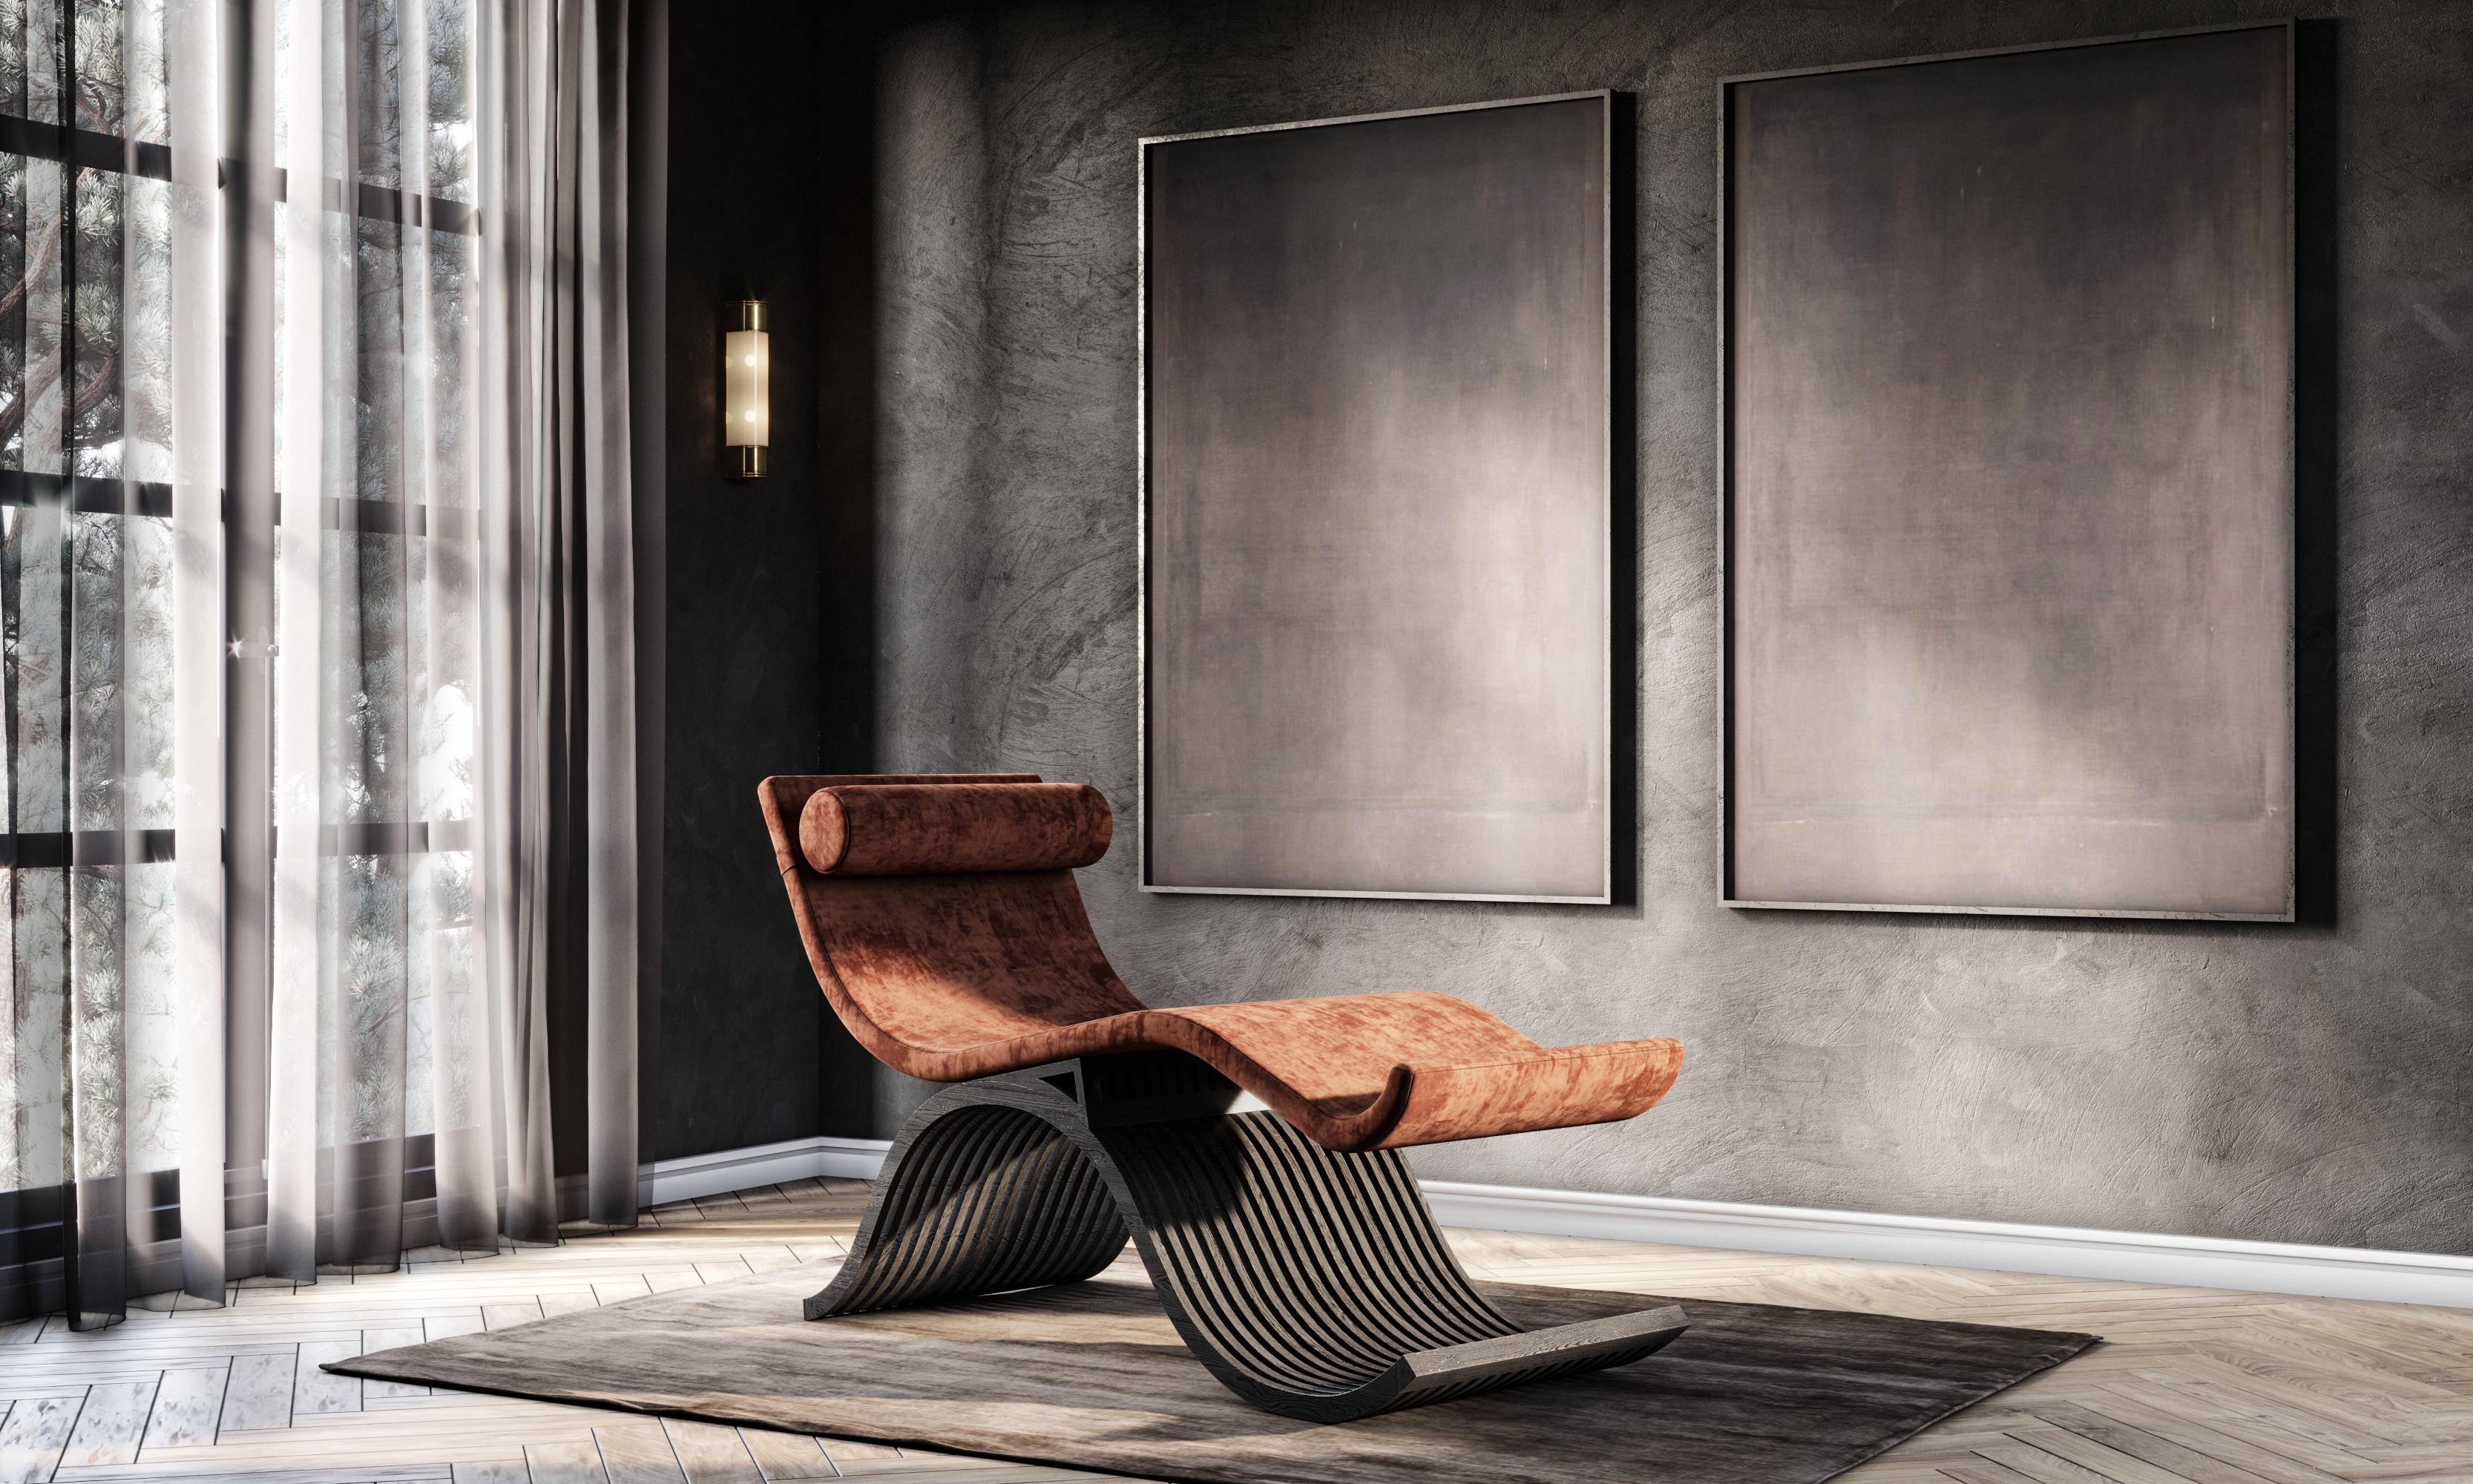 The iman lounger makes a statement. Available in a combination of beautiful materials and finishes. The Iman can be mixed and matched to present a stylized, alluring piece that is operative yet impressively striking. All combinations are bespoke to